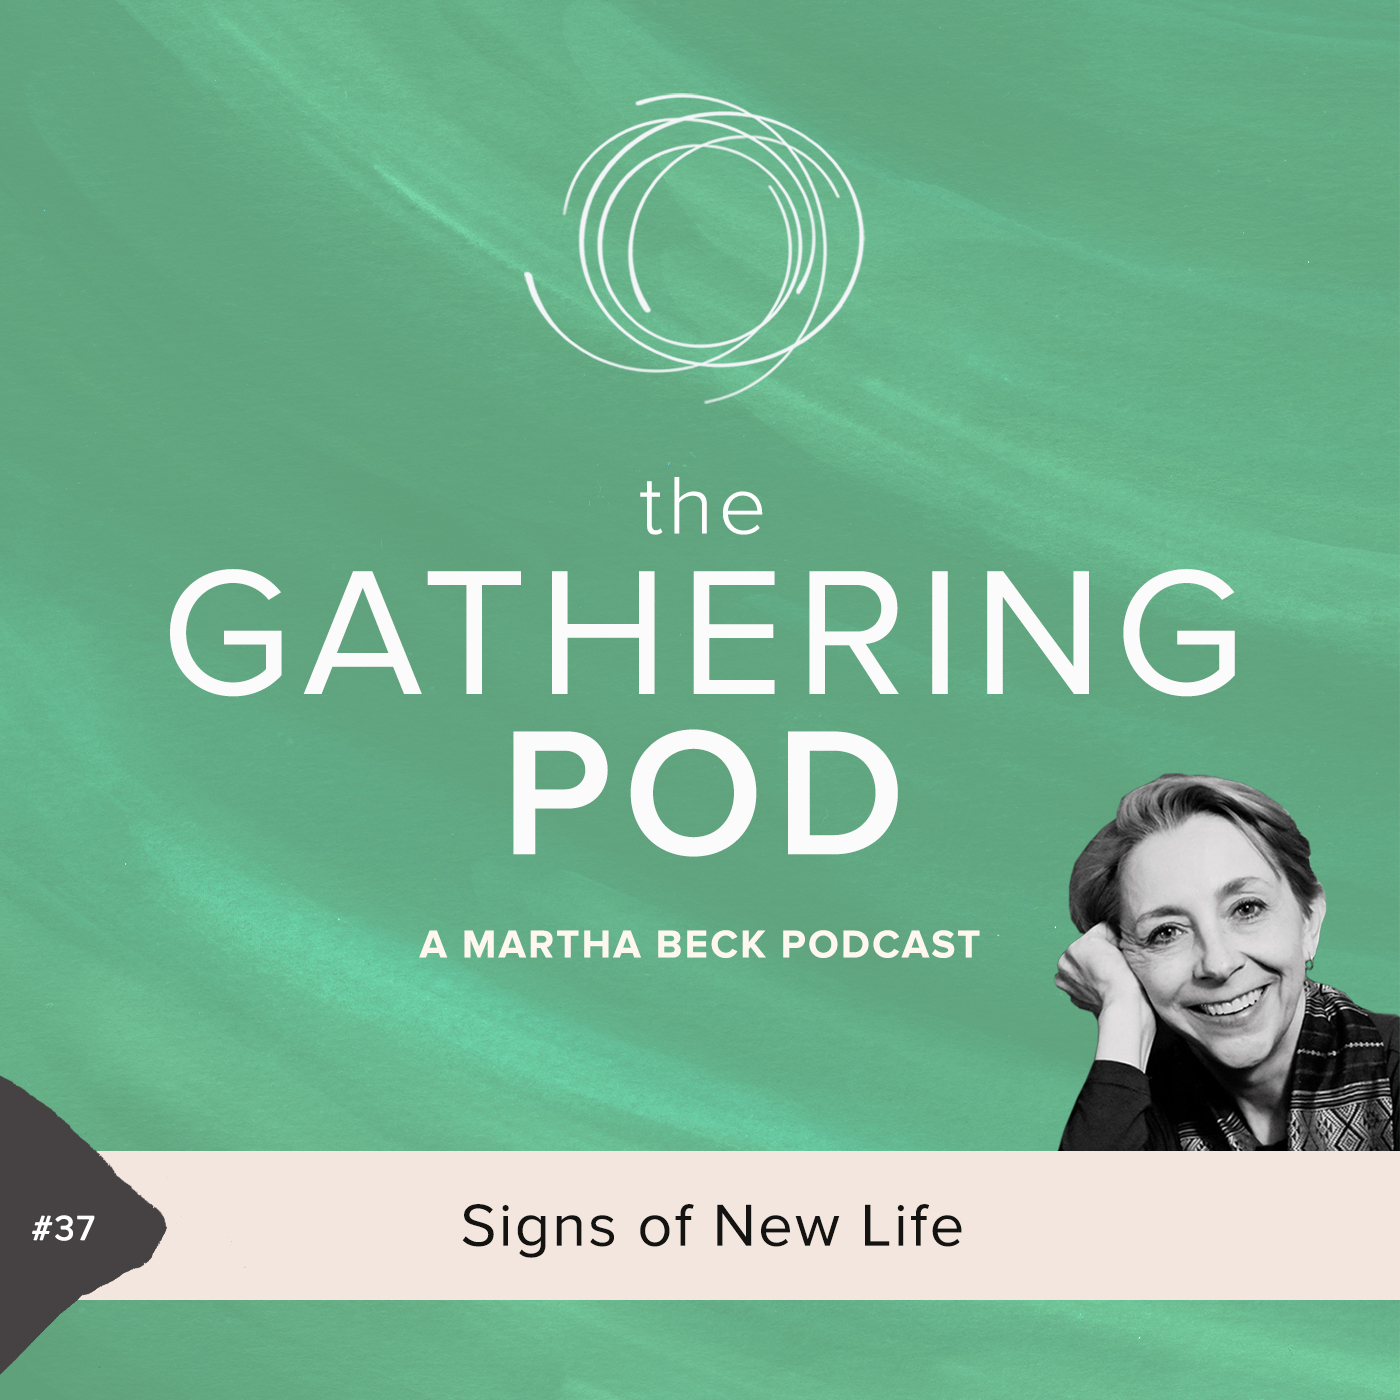 Image for The Gathering Pod A Martha Beck Podcast Episode #37 Signs of New Life